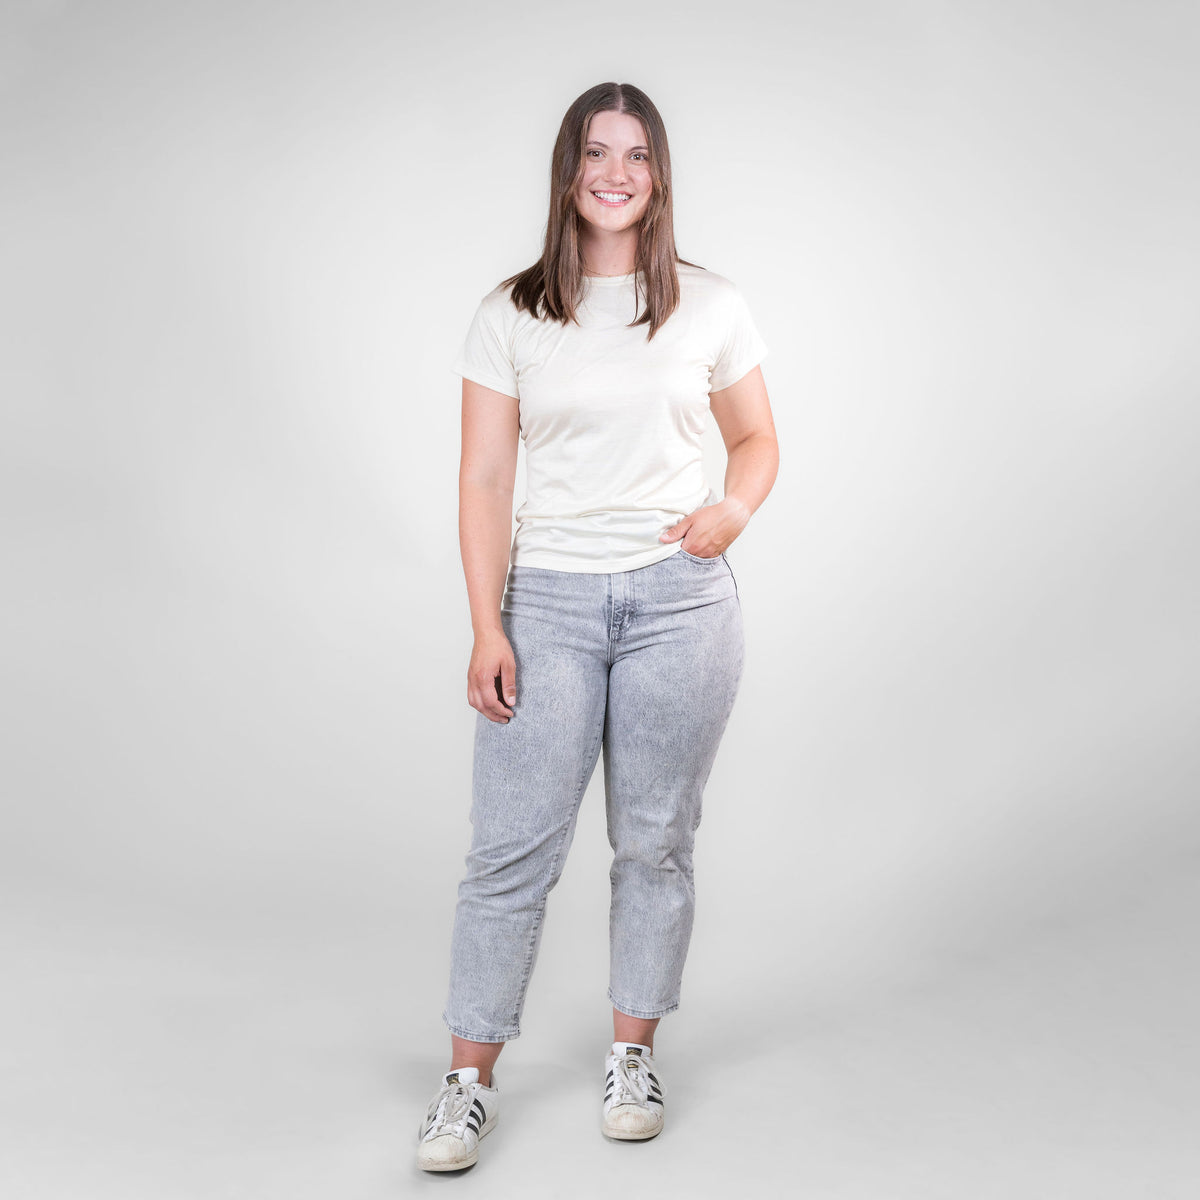 A full body photo of a smiling brown haired woman standing against a white background. She is wearing white sneakers, gray jeans, and a natural white Alpacas of Montana lightweight athletic activewear outerwear breathable moisture wicking antimicrobial soft comfortable exercise short sleeve alpaca women&#39;s performance tee for running sports exercise work out hiking climbing camping biking